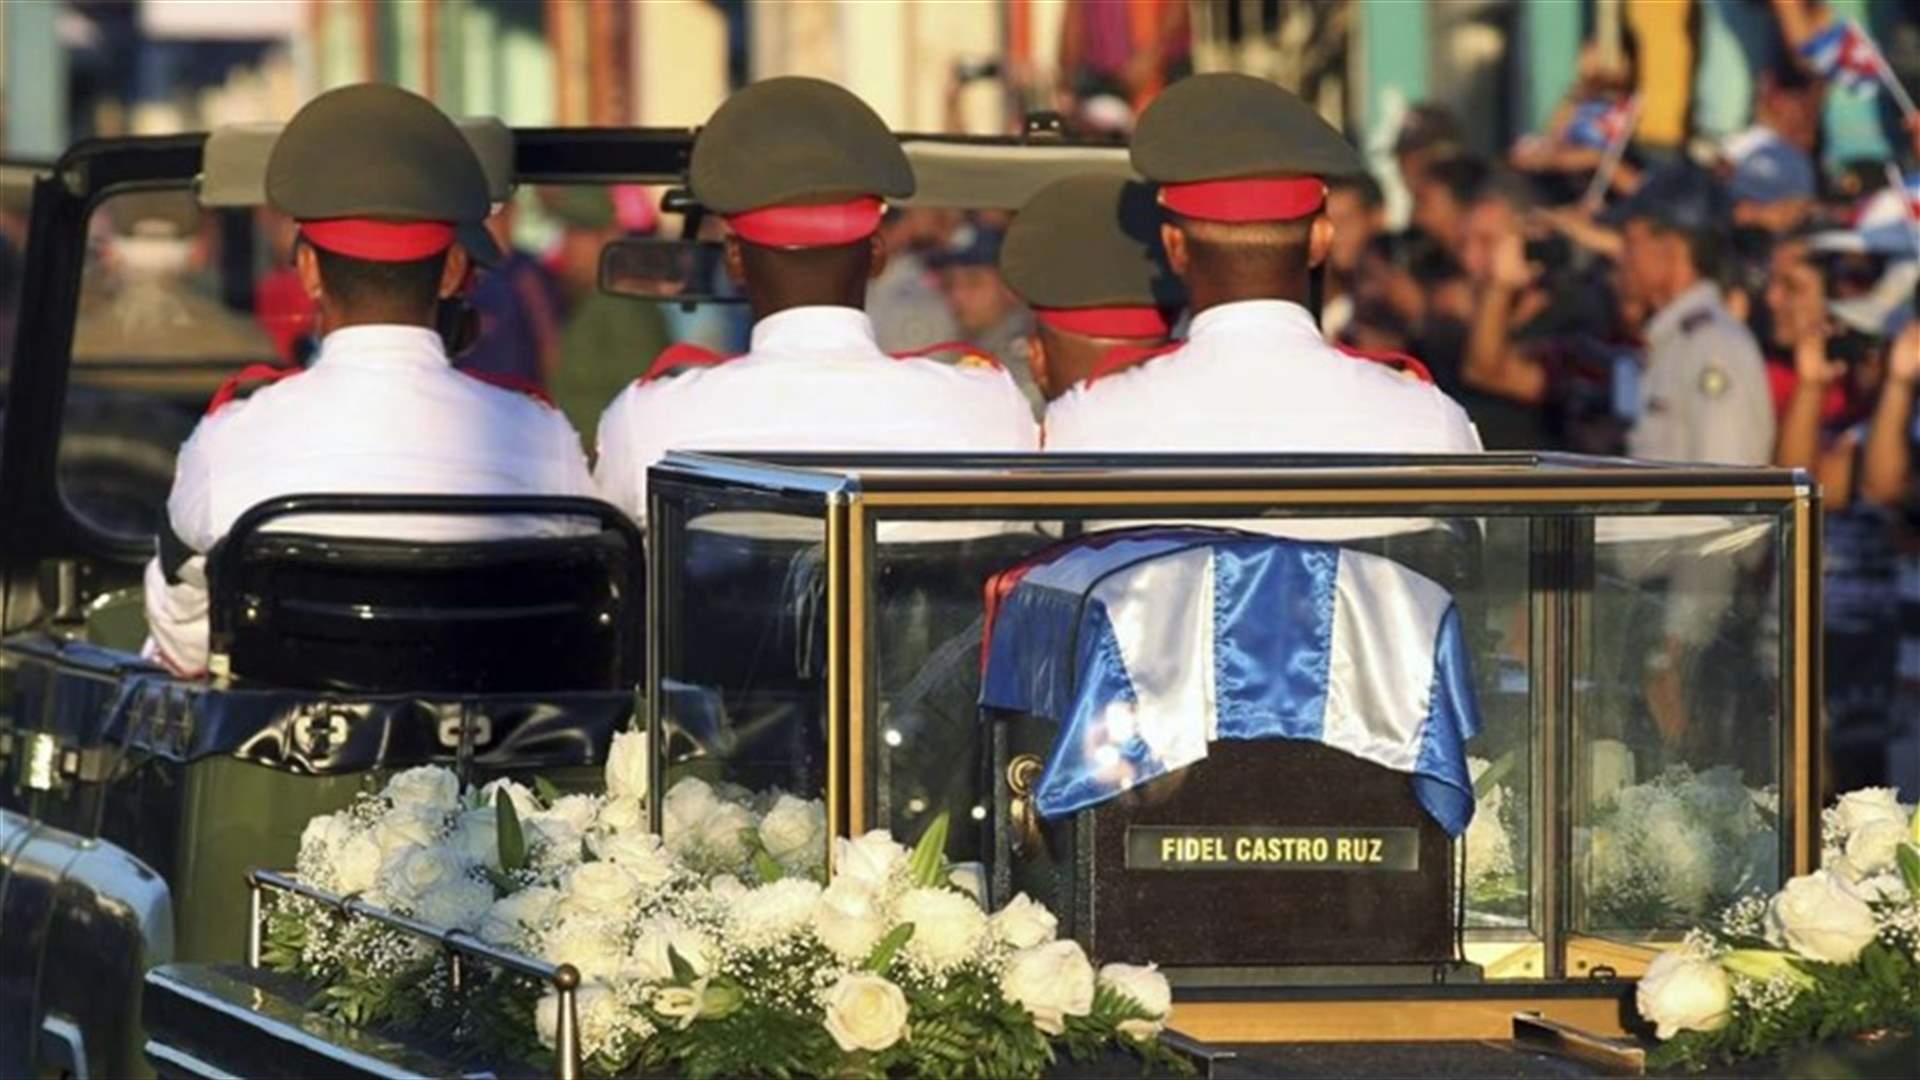 Fidel Castro laid to rest in Cuba, ending nine days of mourning